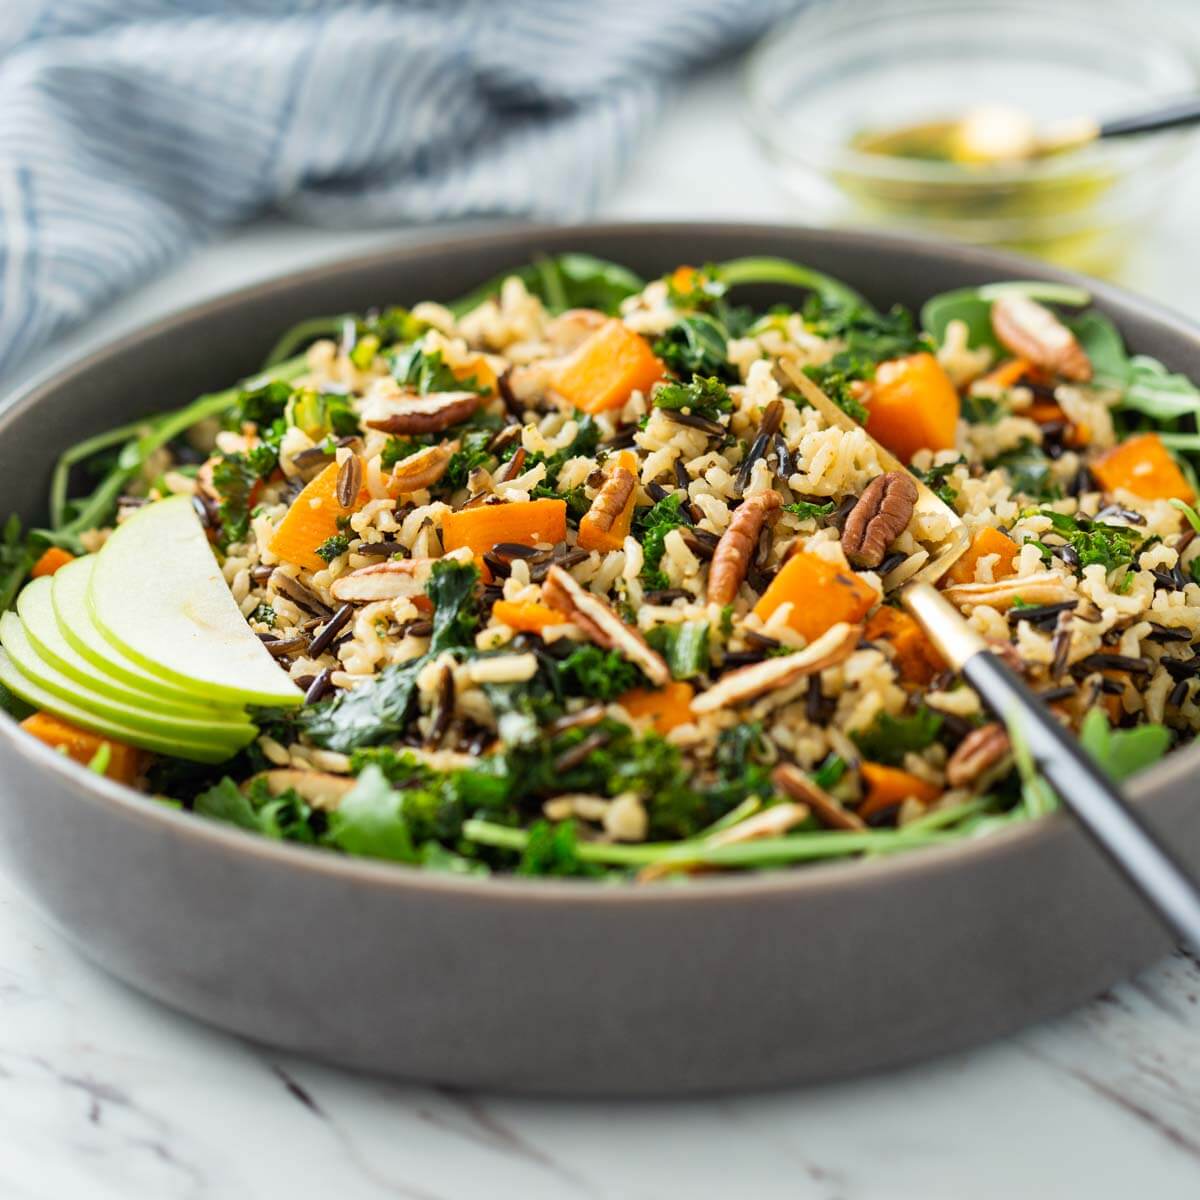 Sweet potato wild rice salad in a serving bowl with serving fork.